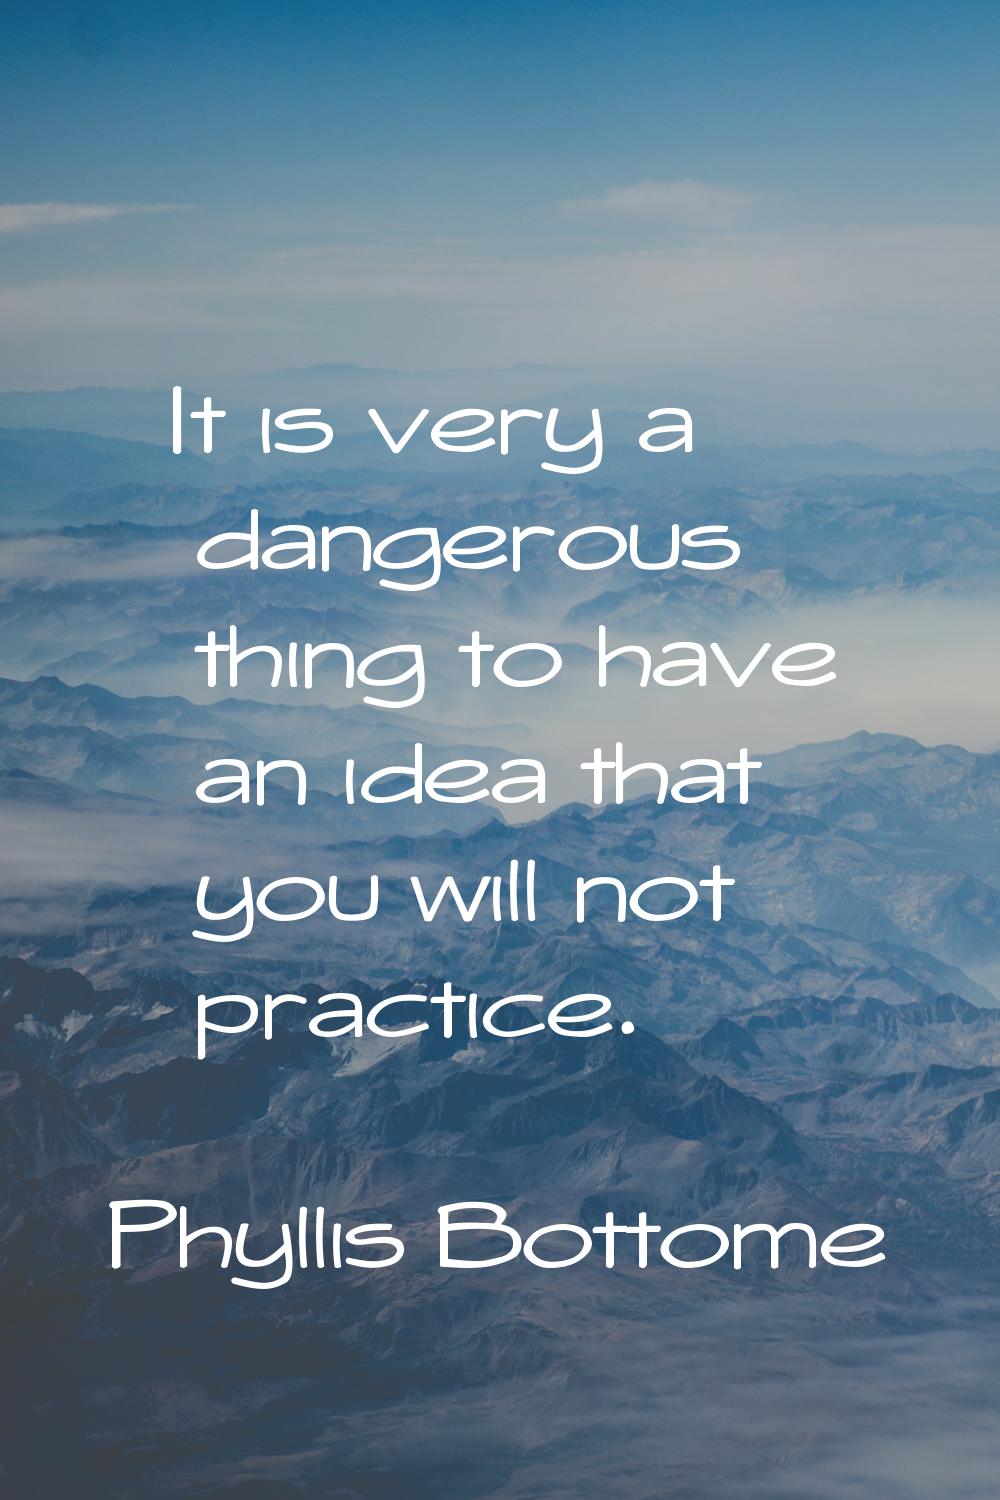 It is very a dangerous thing to have an idea that you will not practice.